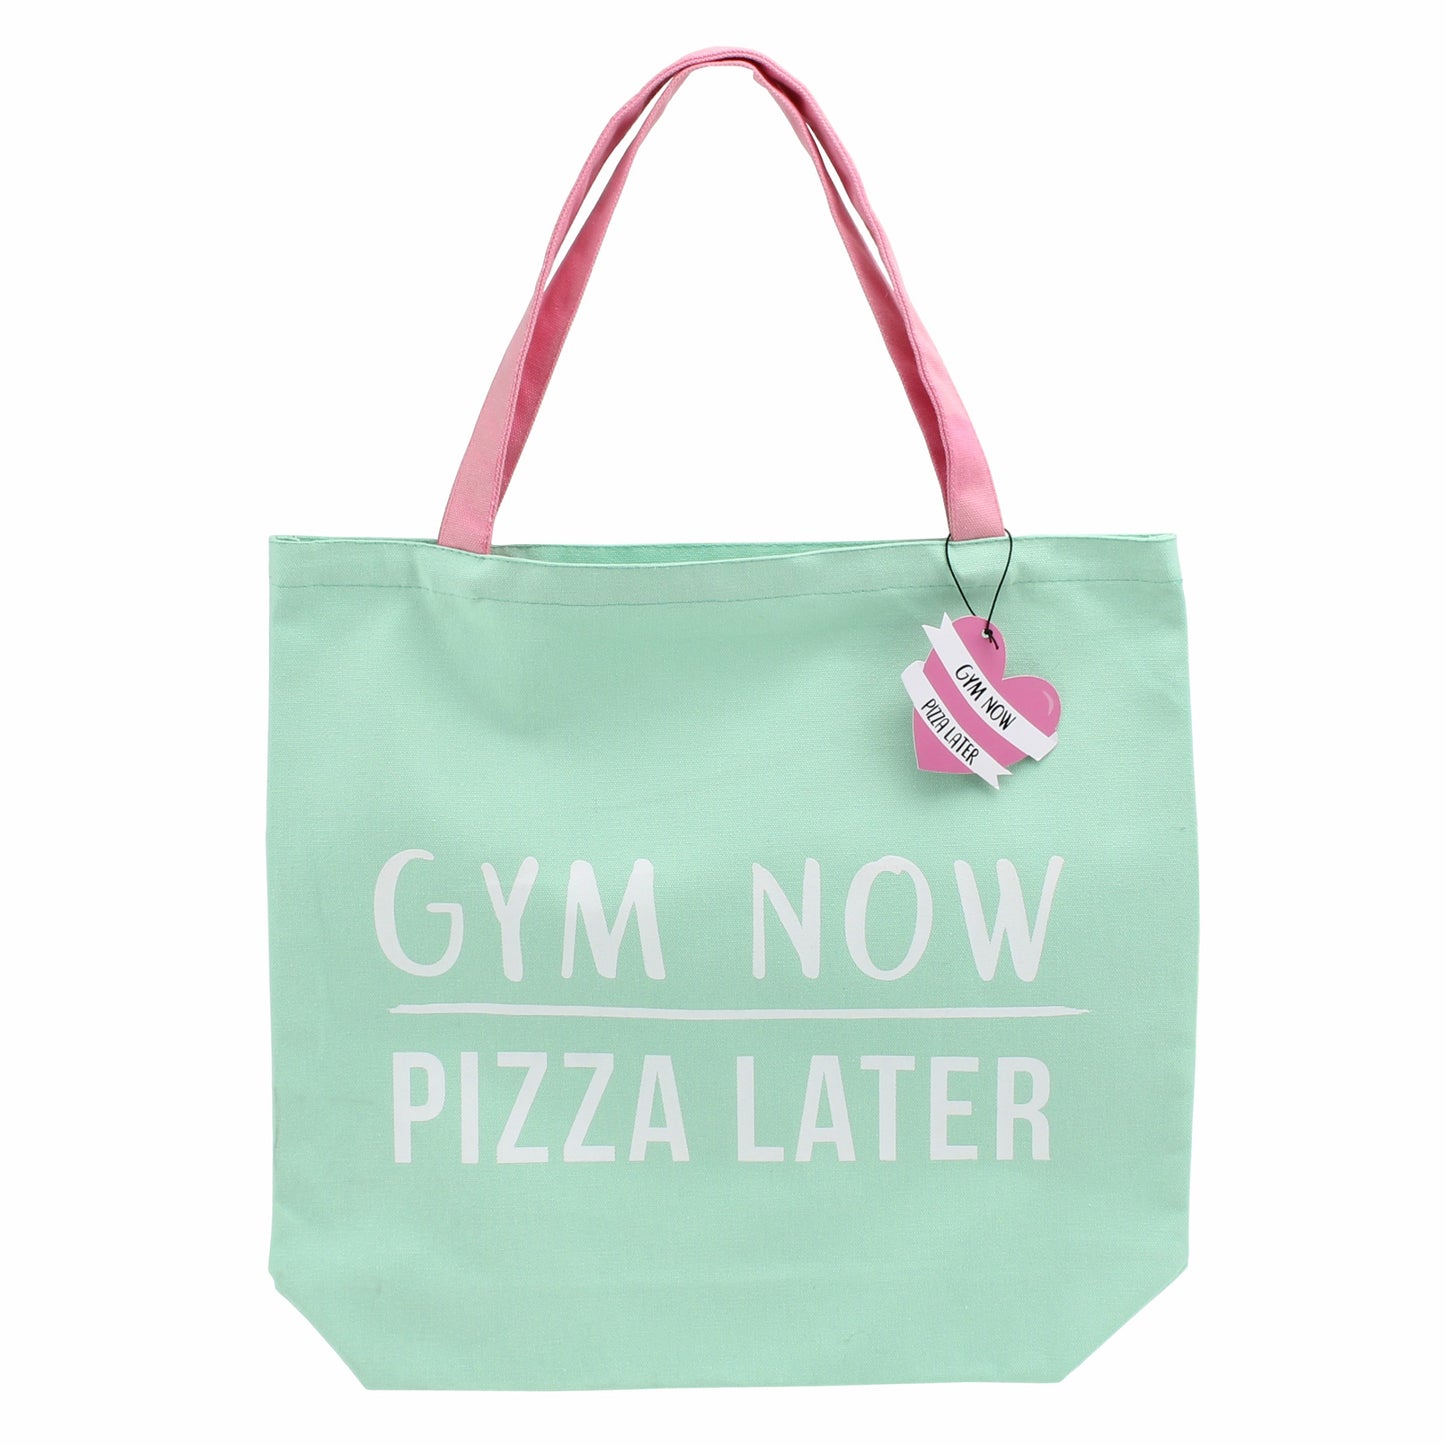 Green canvas shopping bag featuring slogan Gym now, pizza later